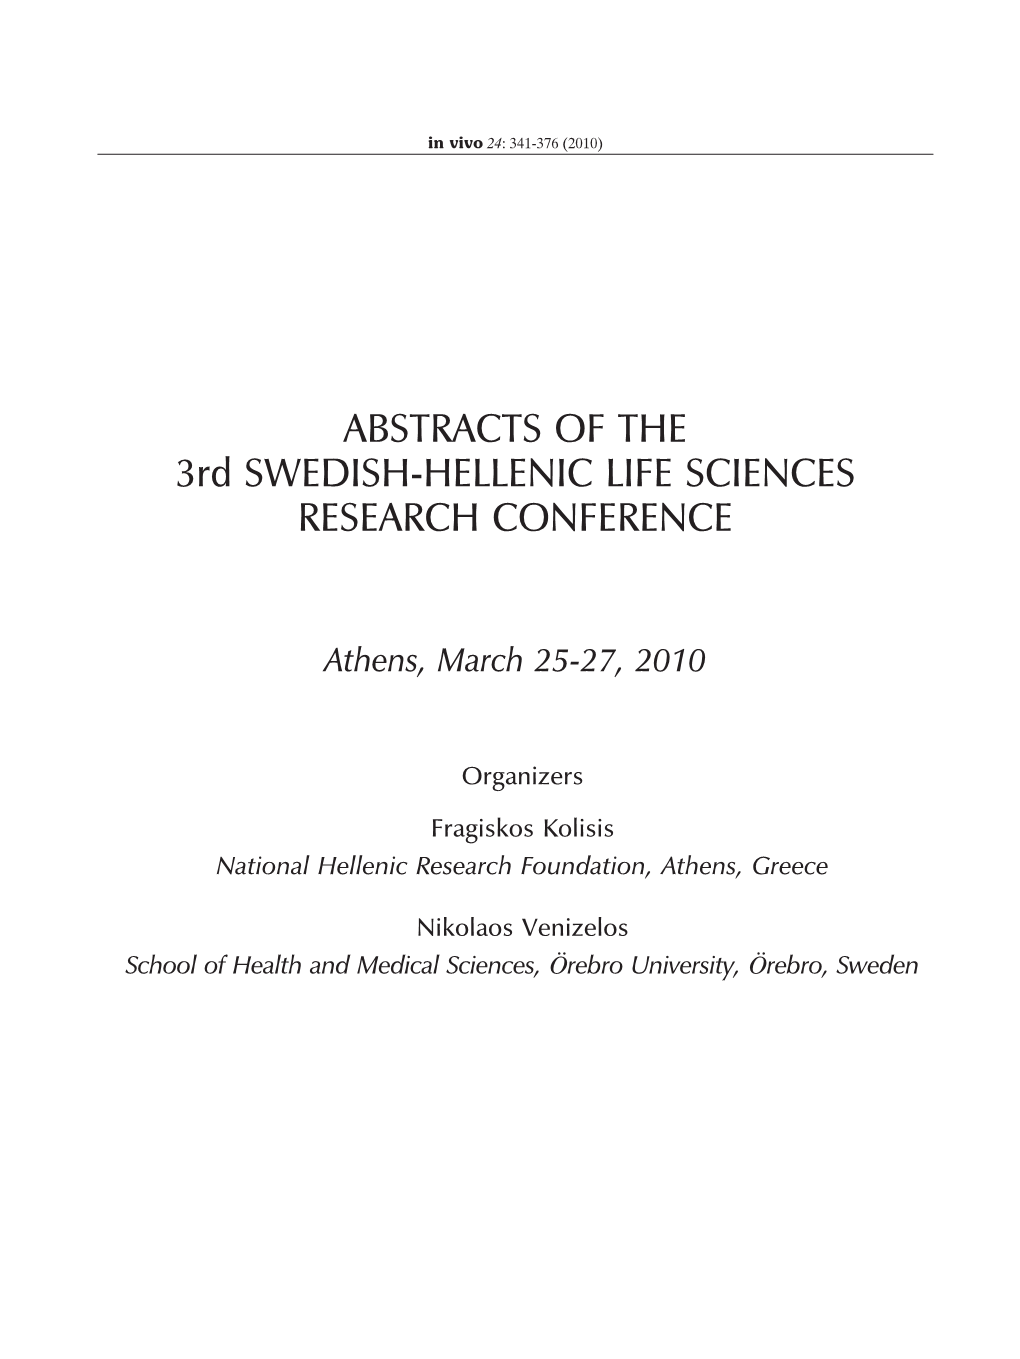 ABSTRACTS of the 3Rd SWEDISH-HELLENIC LIFE SCIENCES RESEARCH CONFERENCE